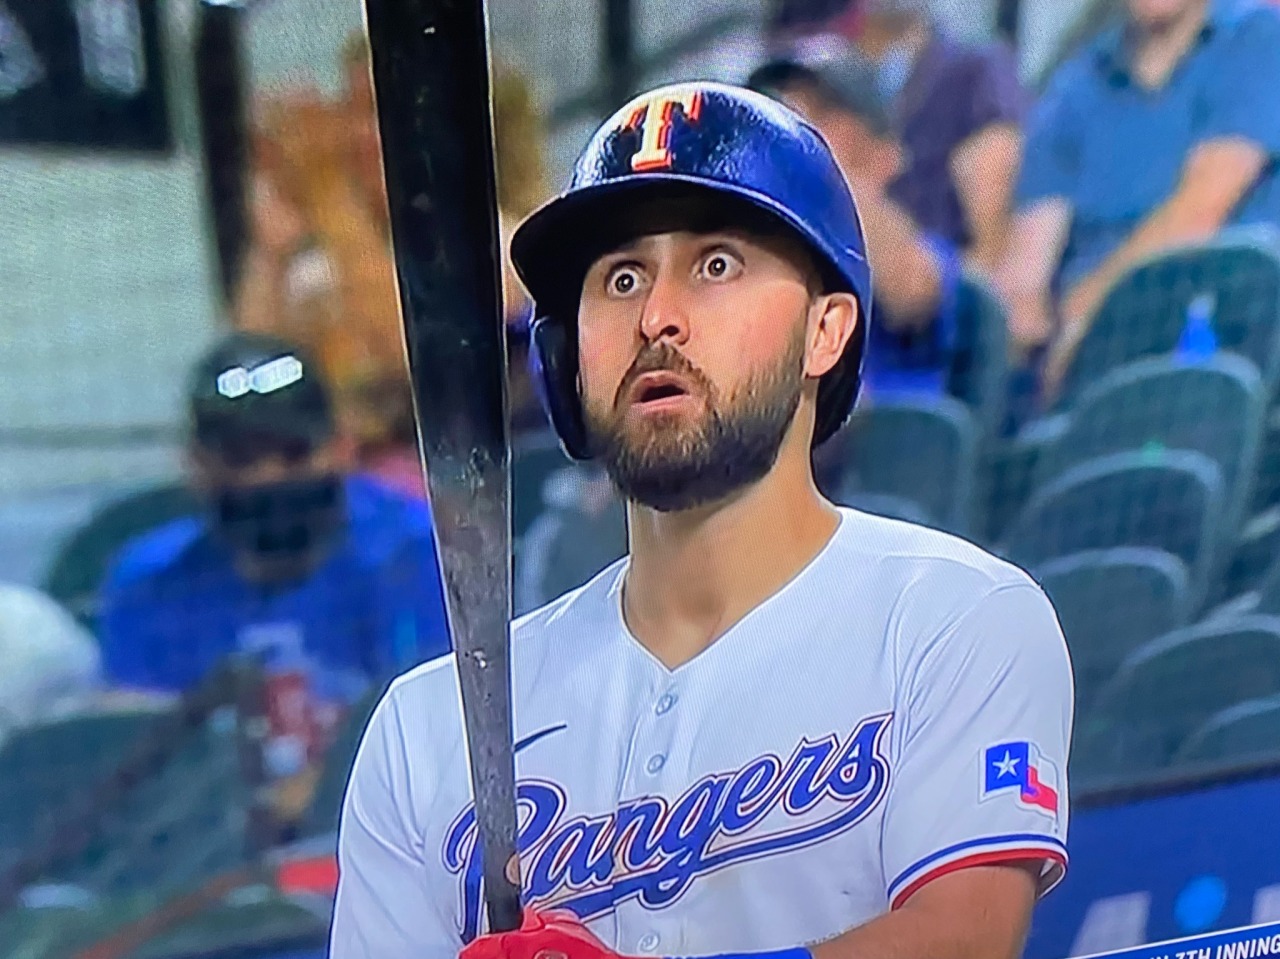 yeehaw 🤠 — Joey Gallo sees a ghost during the eighth inning